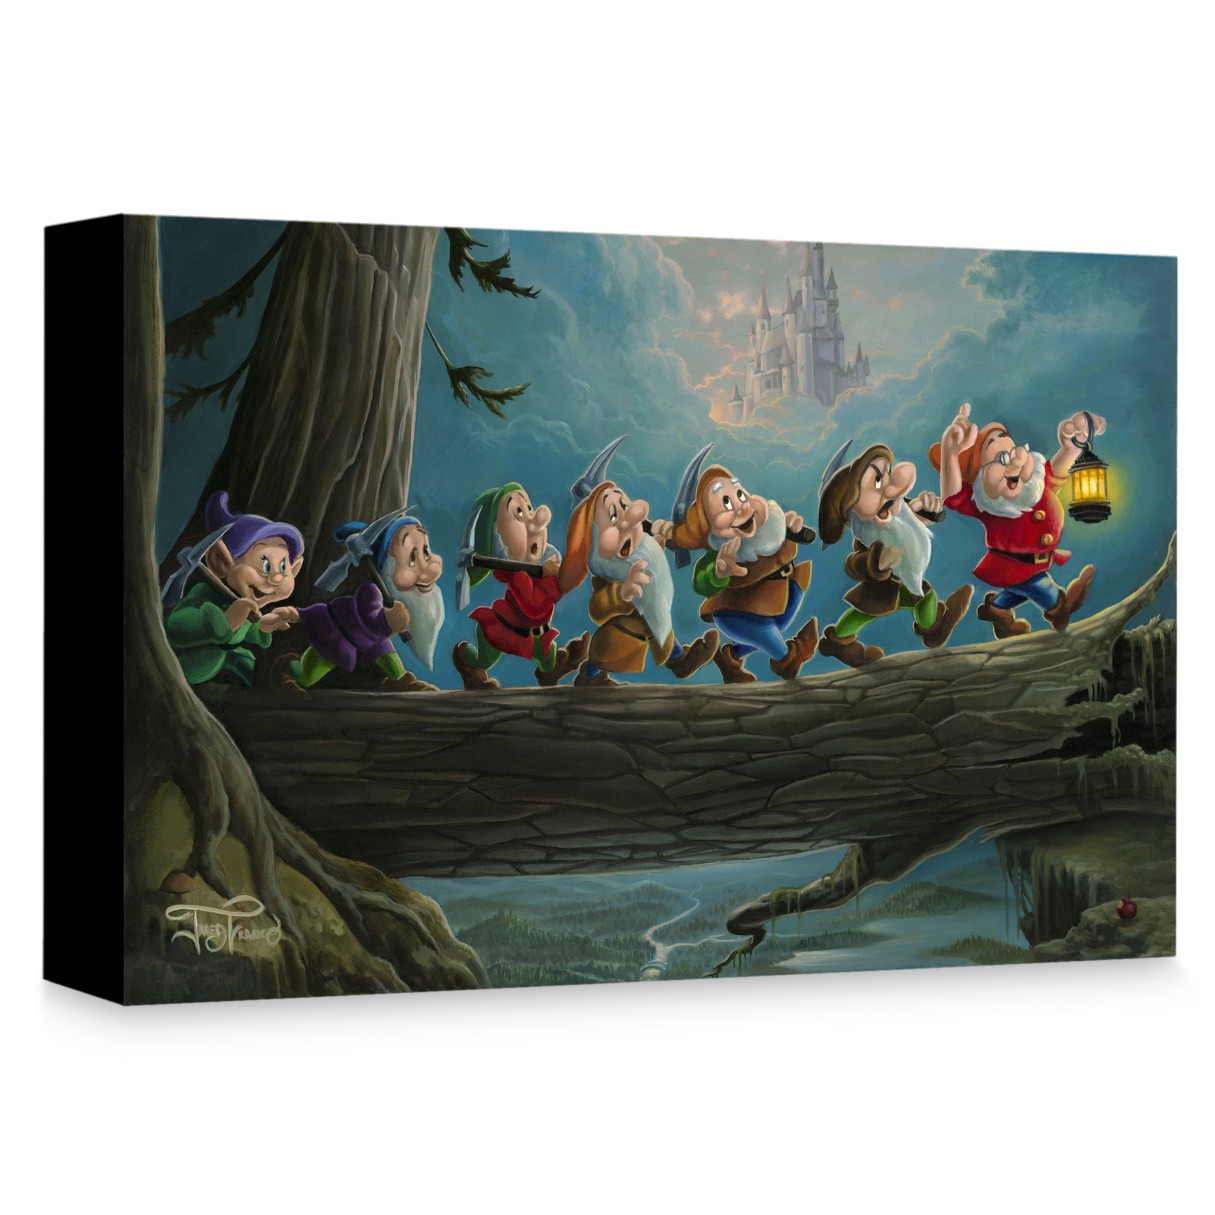 Snow White and the Seven Dwarfs ''Home to Snow'' Giclée on Canvas by Jared Franco